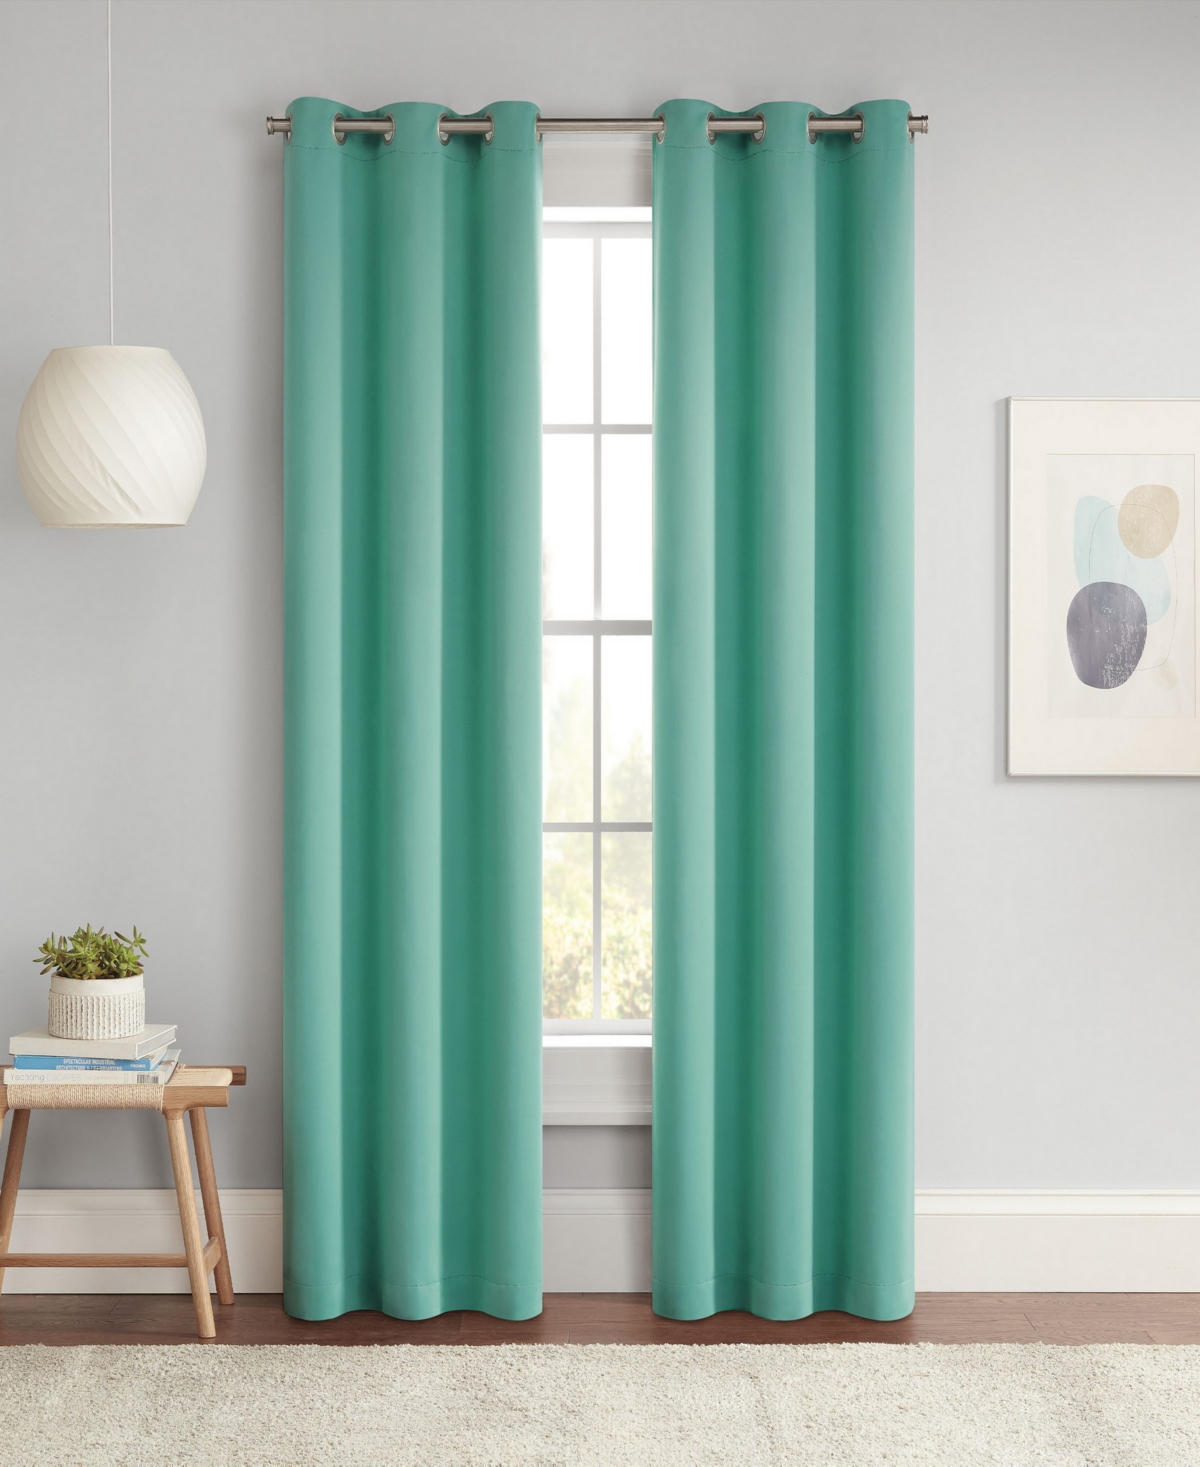 Eclipse Darrell Energy Saving Blackout Grommet Curtain Panel, 54" X 37" In Mint